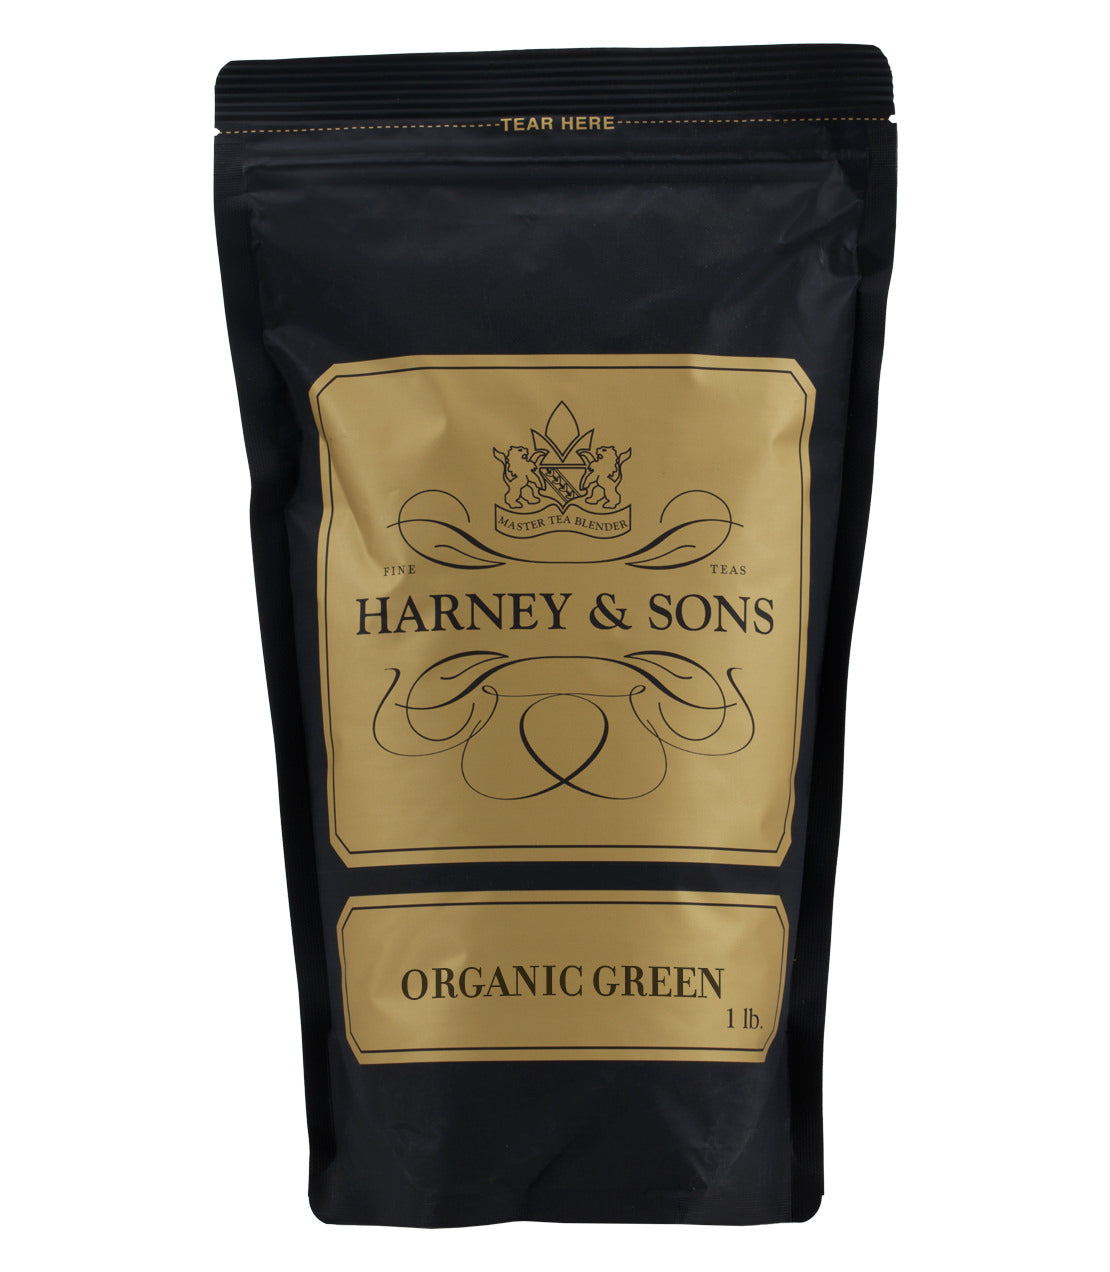 Organic Green with Citrus & Ginkgo - Loose 1 lb. Bag - Harney & Sons Fine Teas